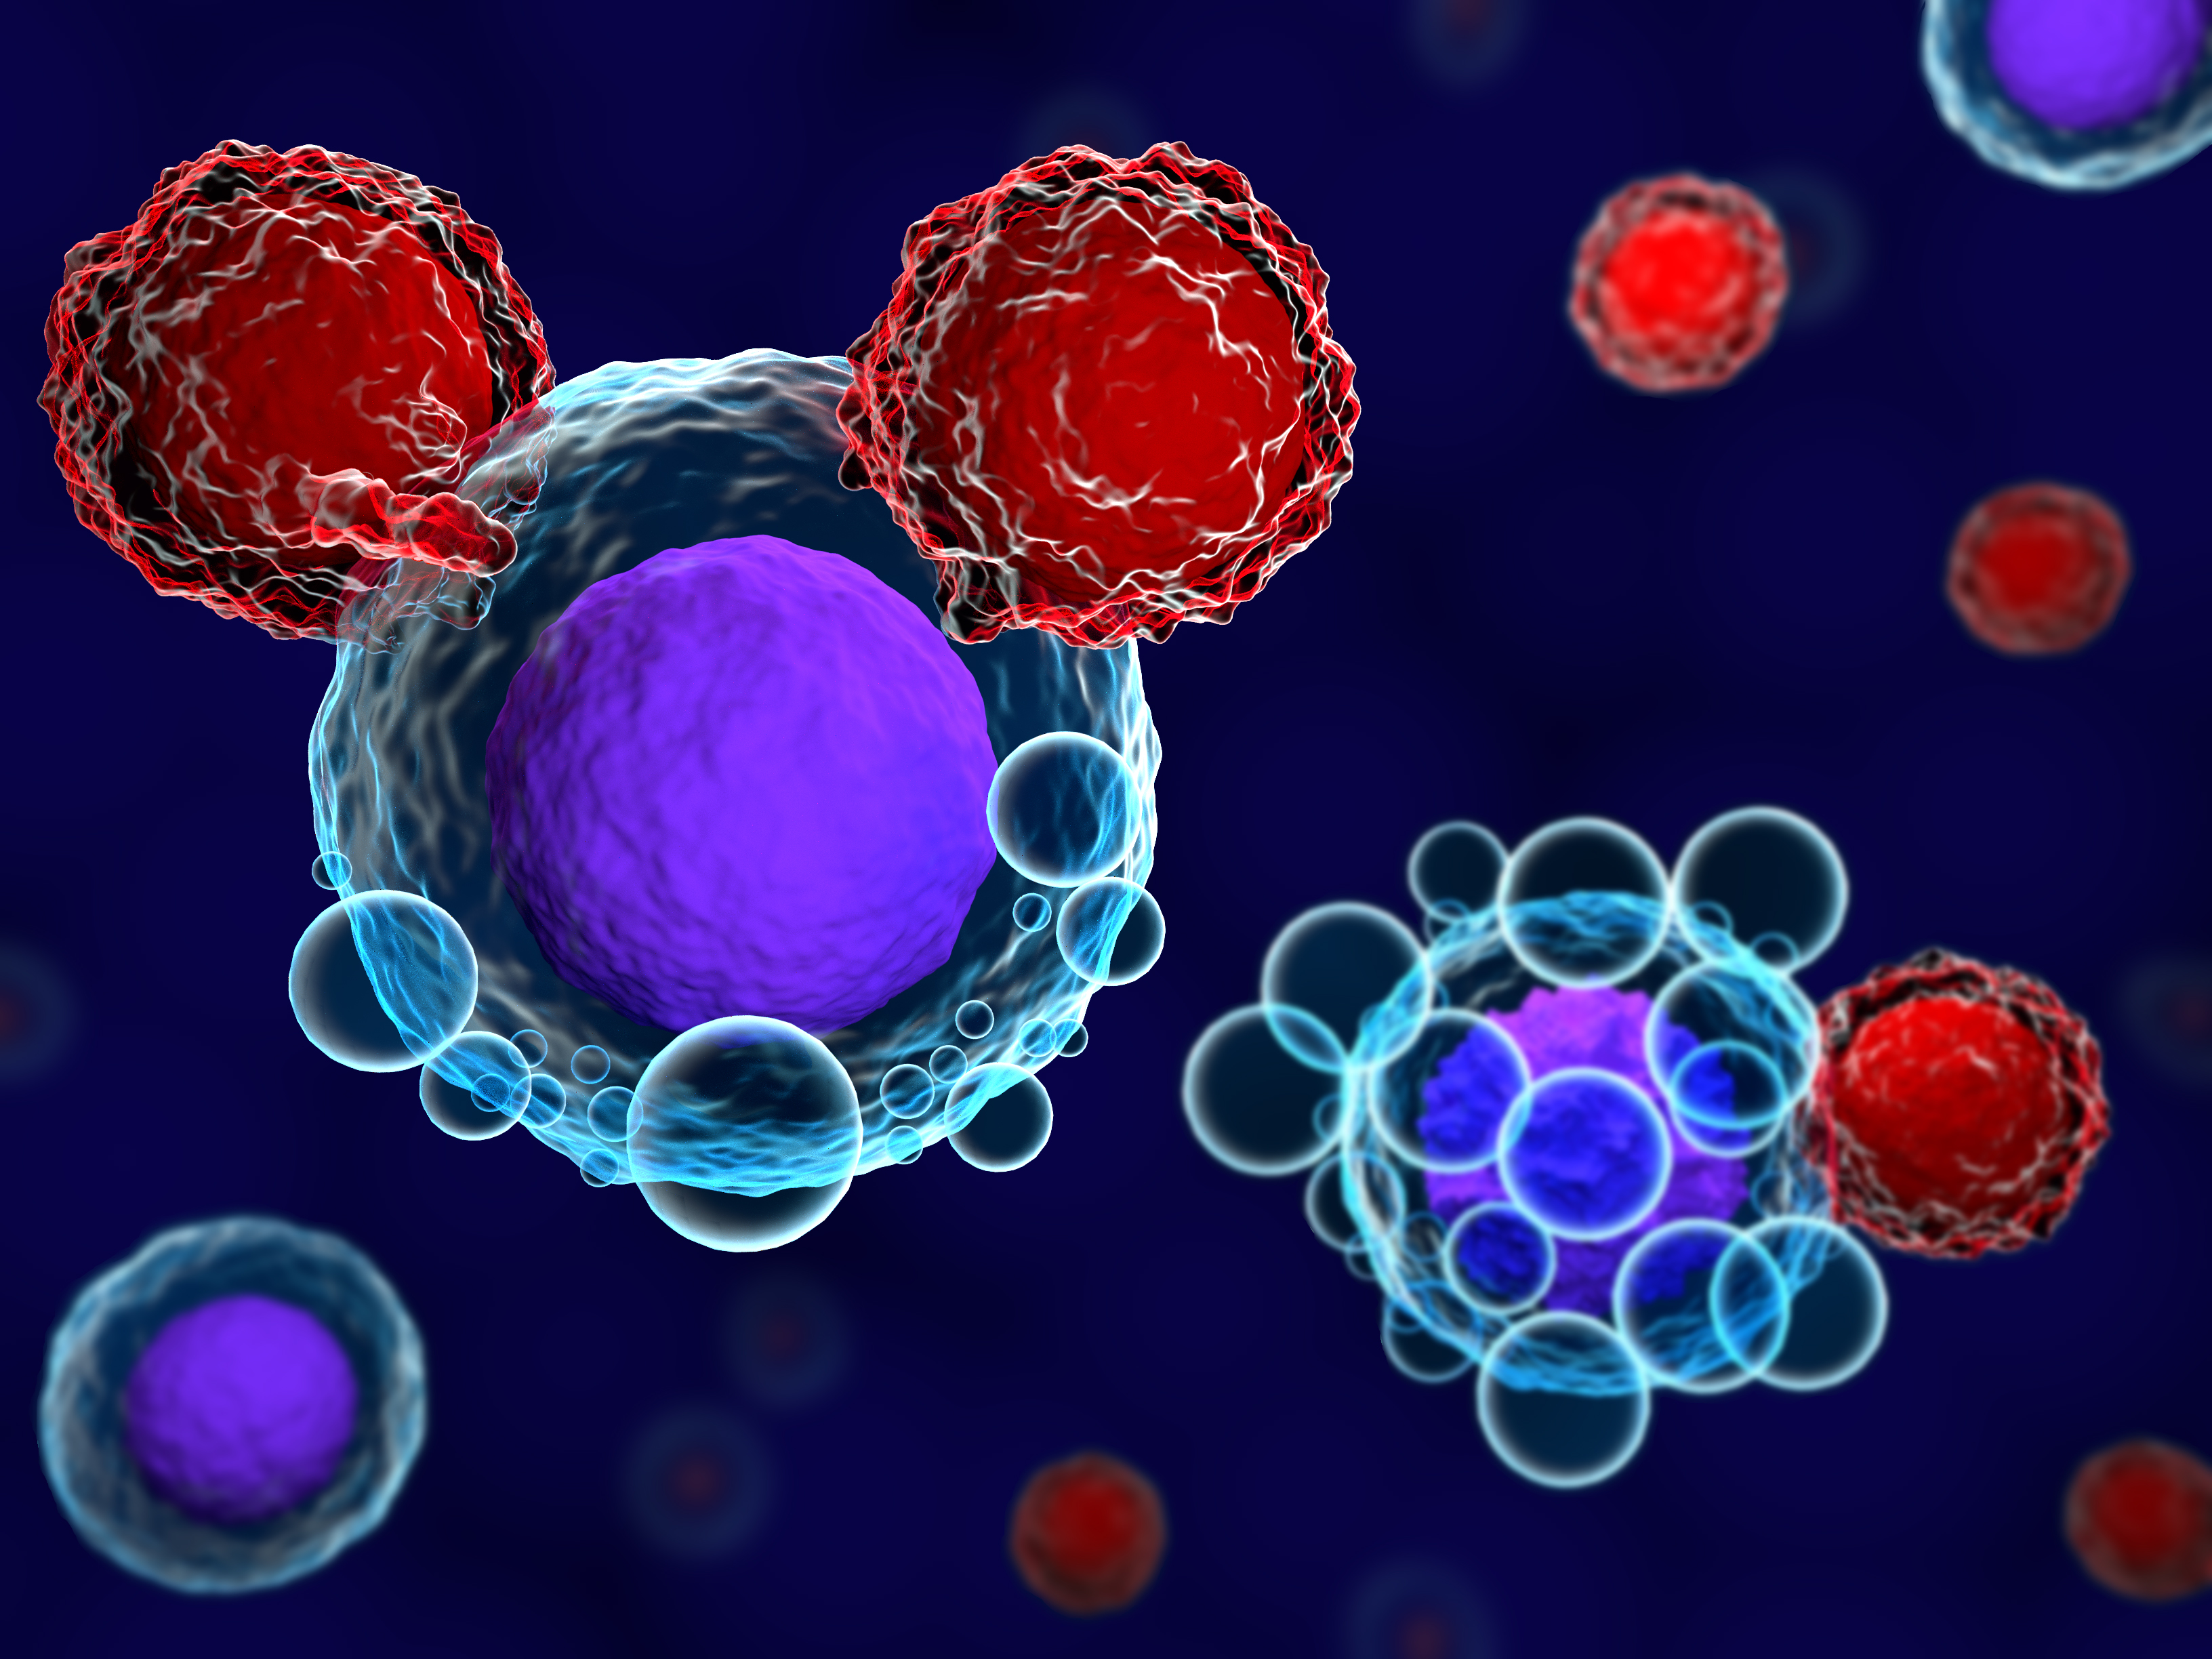 Illustration representing T cells attacking cancer cells